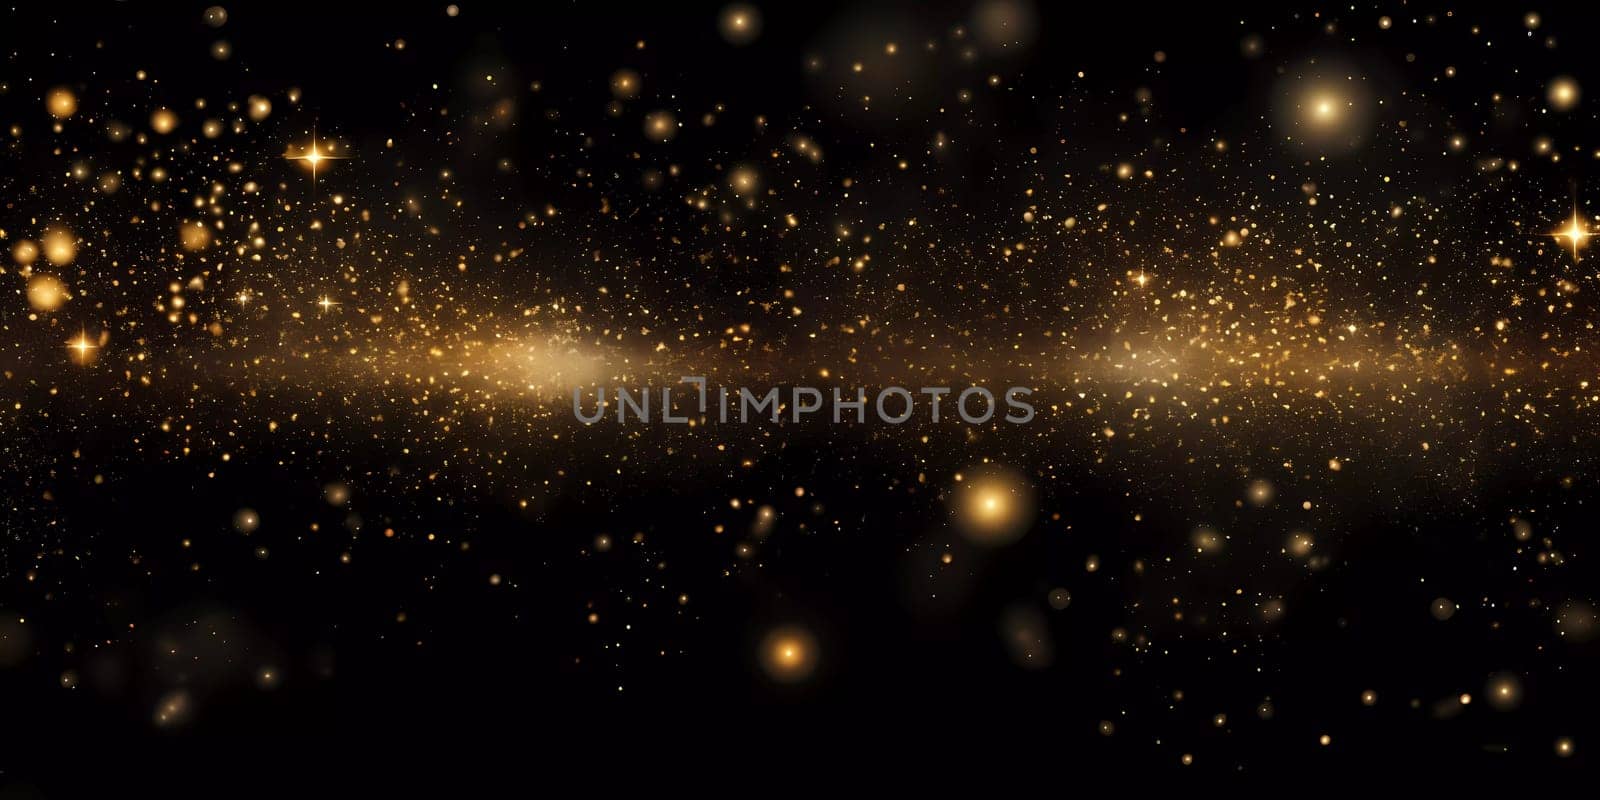 Dark background with golden glowing. Small gold particles on a black background. by sergeykoshkin